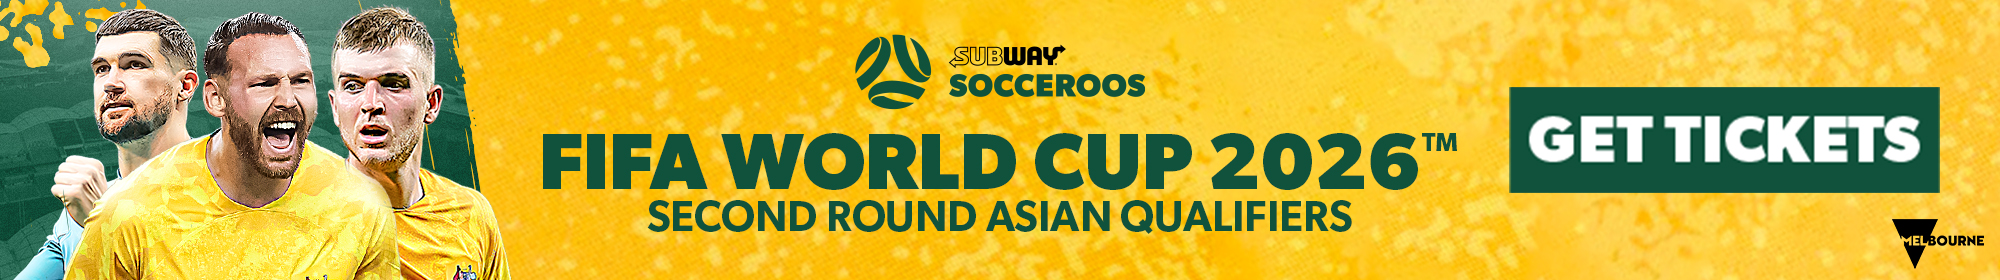 Subway Socceroos squad named for historic October fixtures
Latest